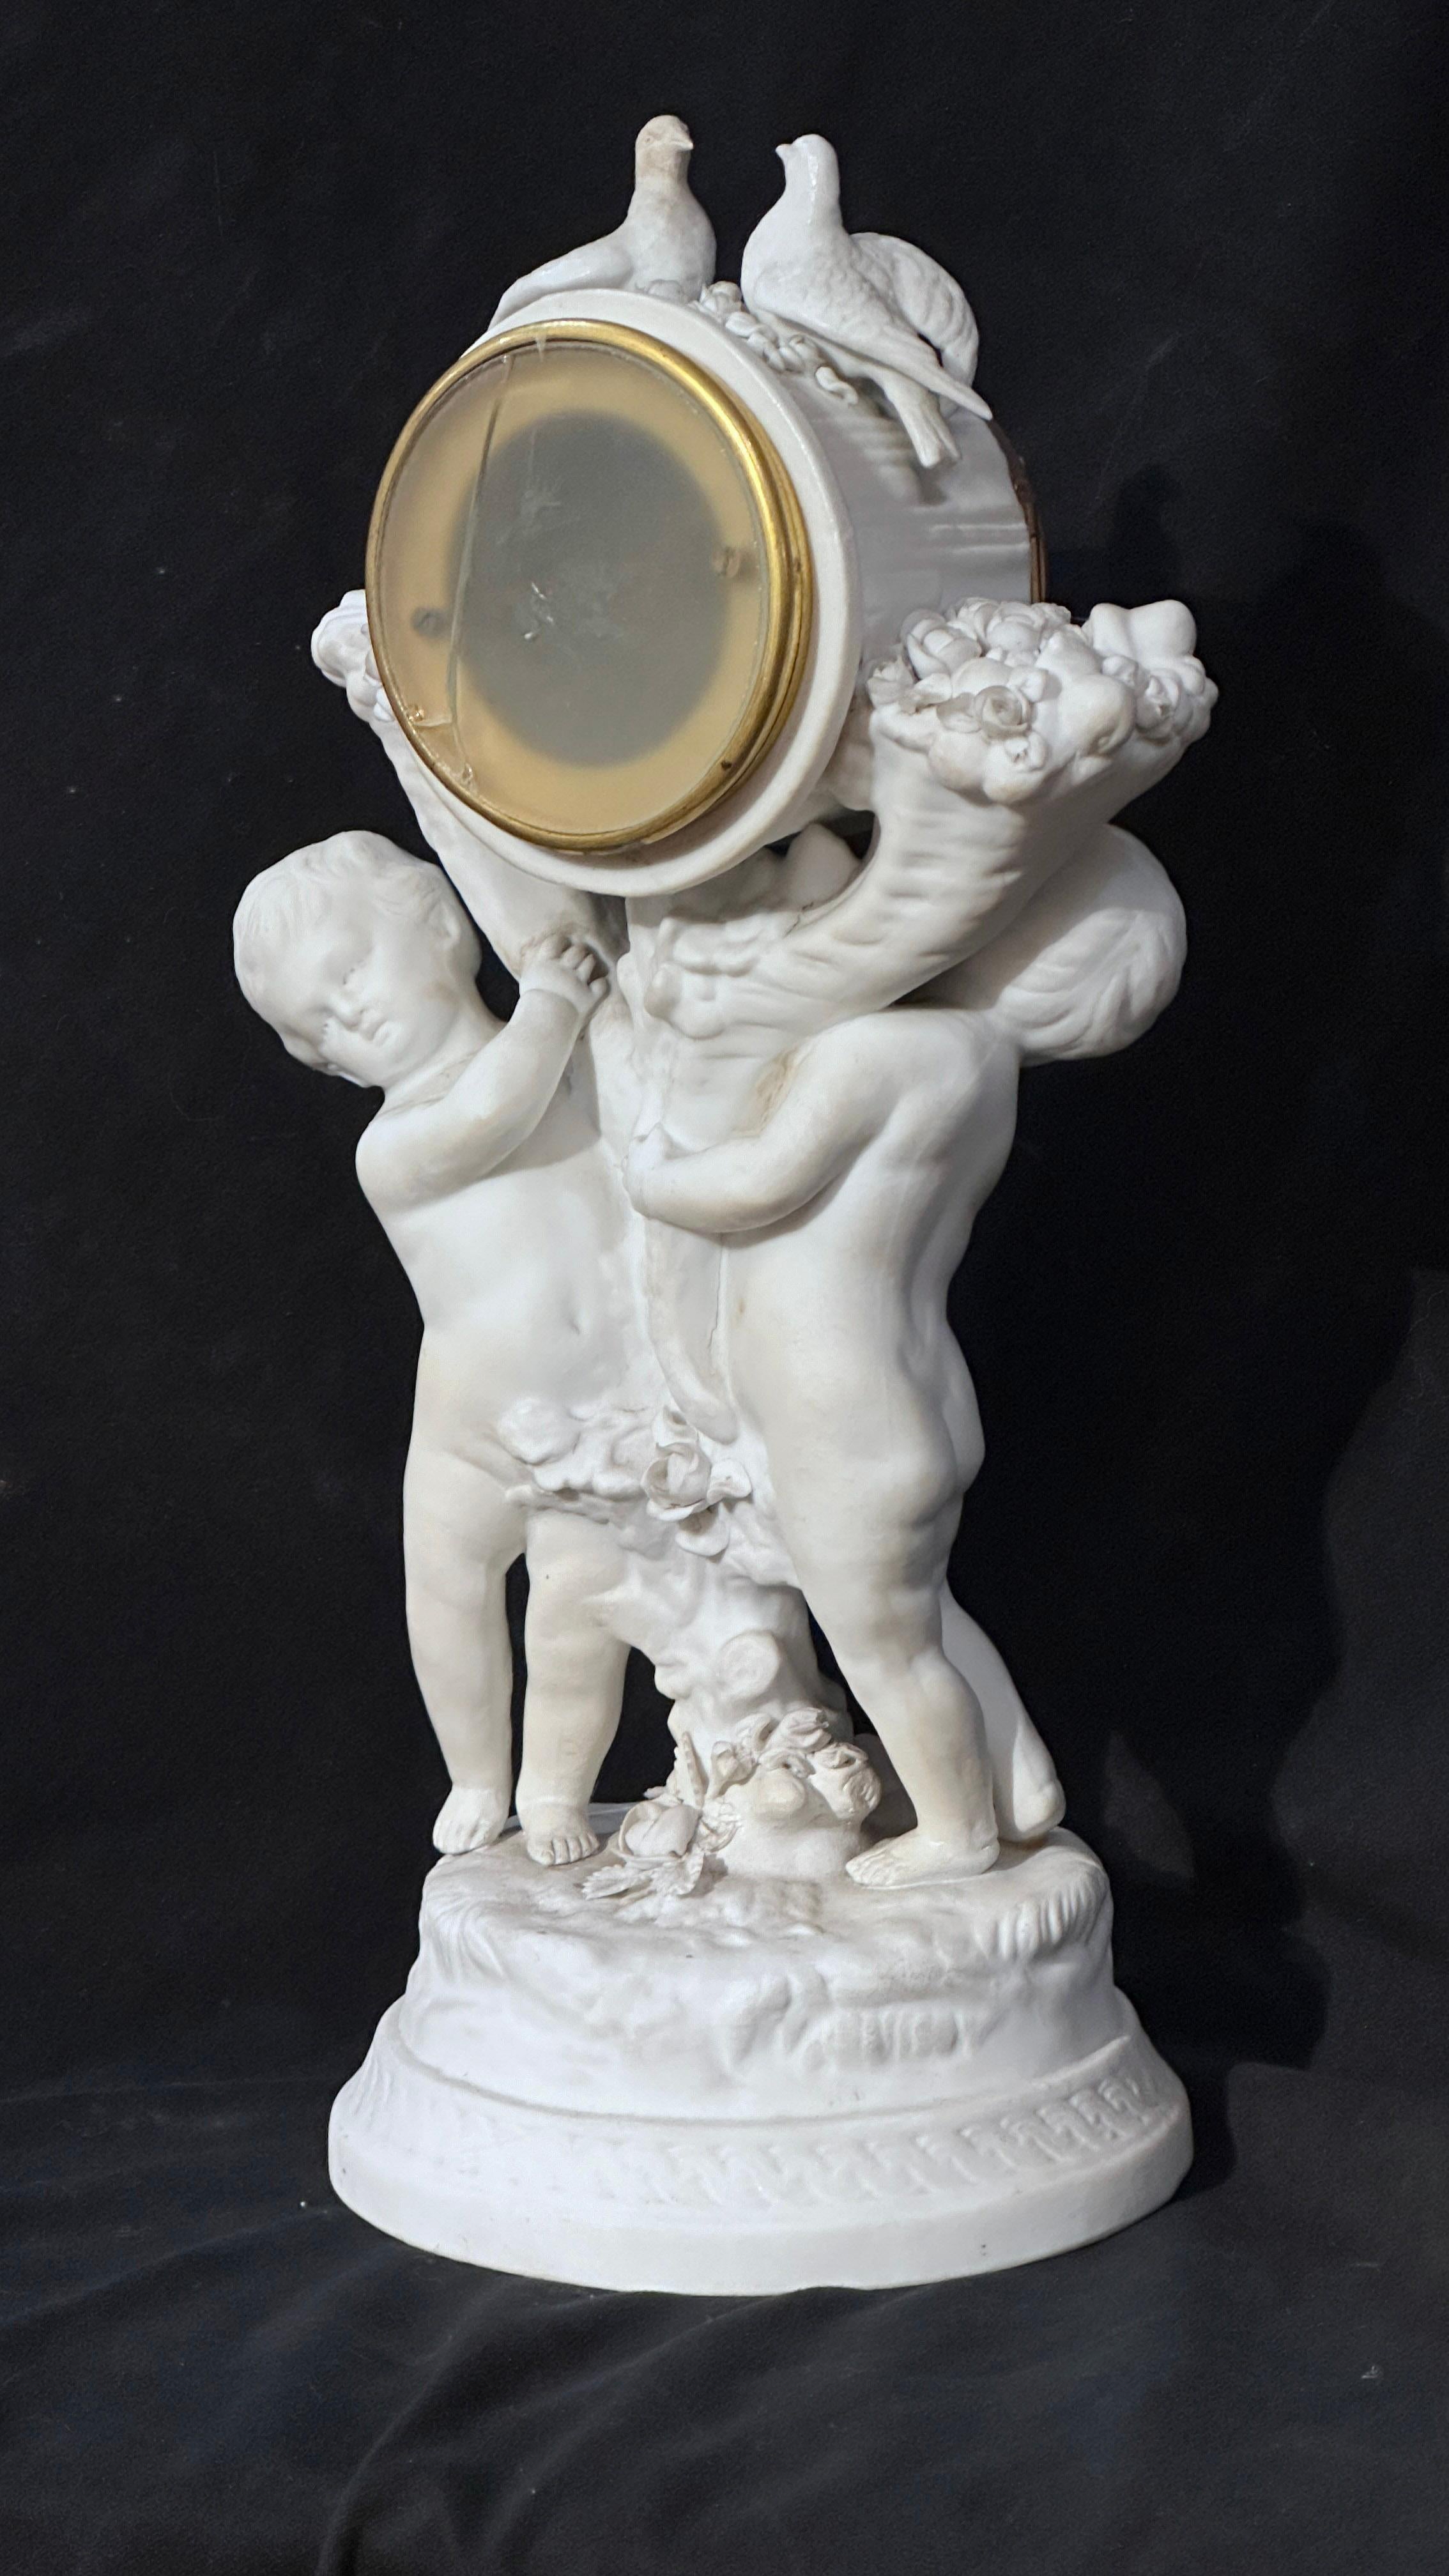 Empire EARLY 19th CENTURY FRENCH PORCELAIN CLOCK  For Sale